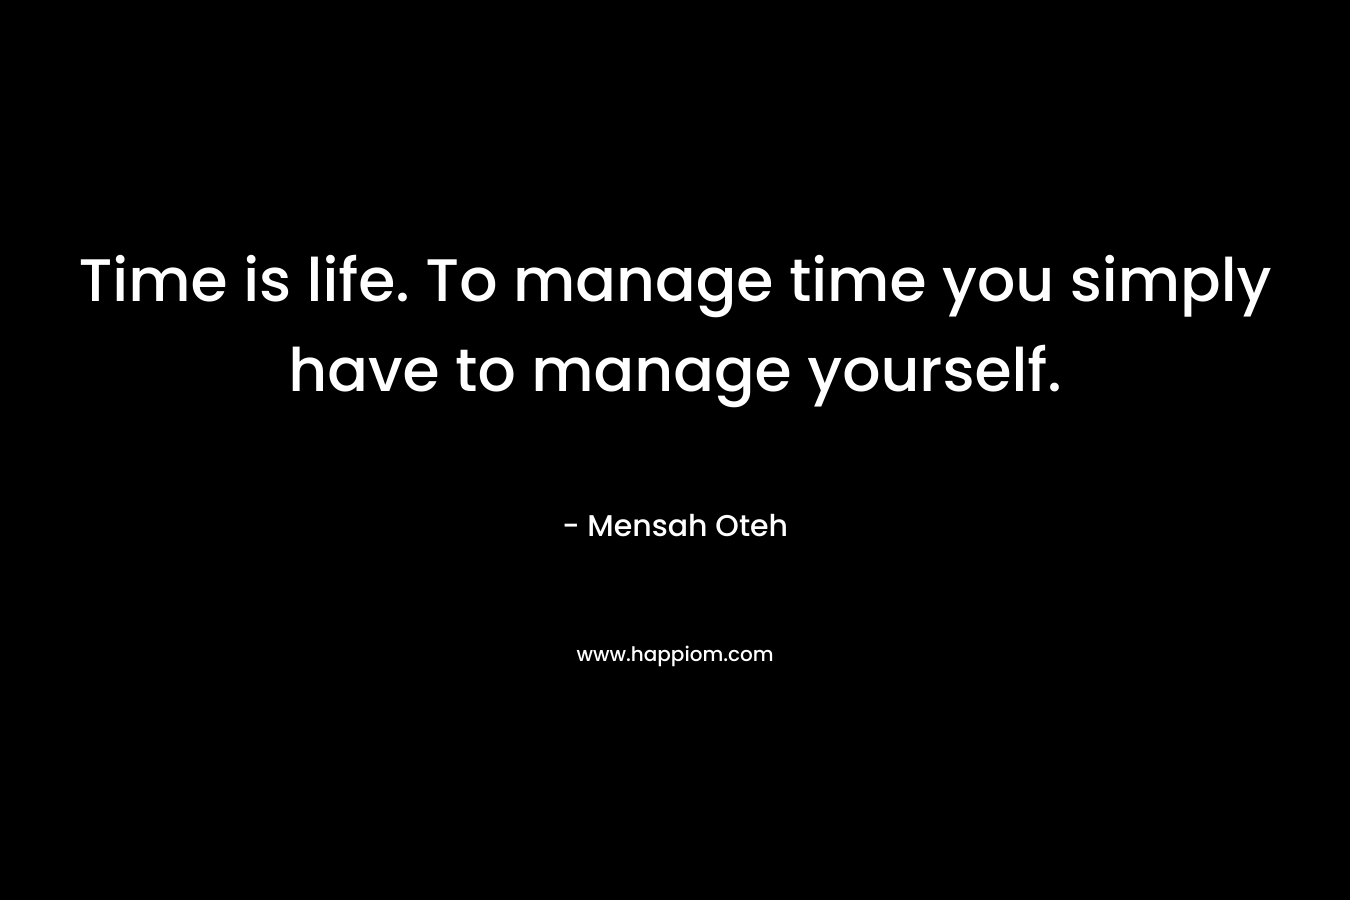 Time is life. To manage time you simply have to manage yourself.